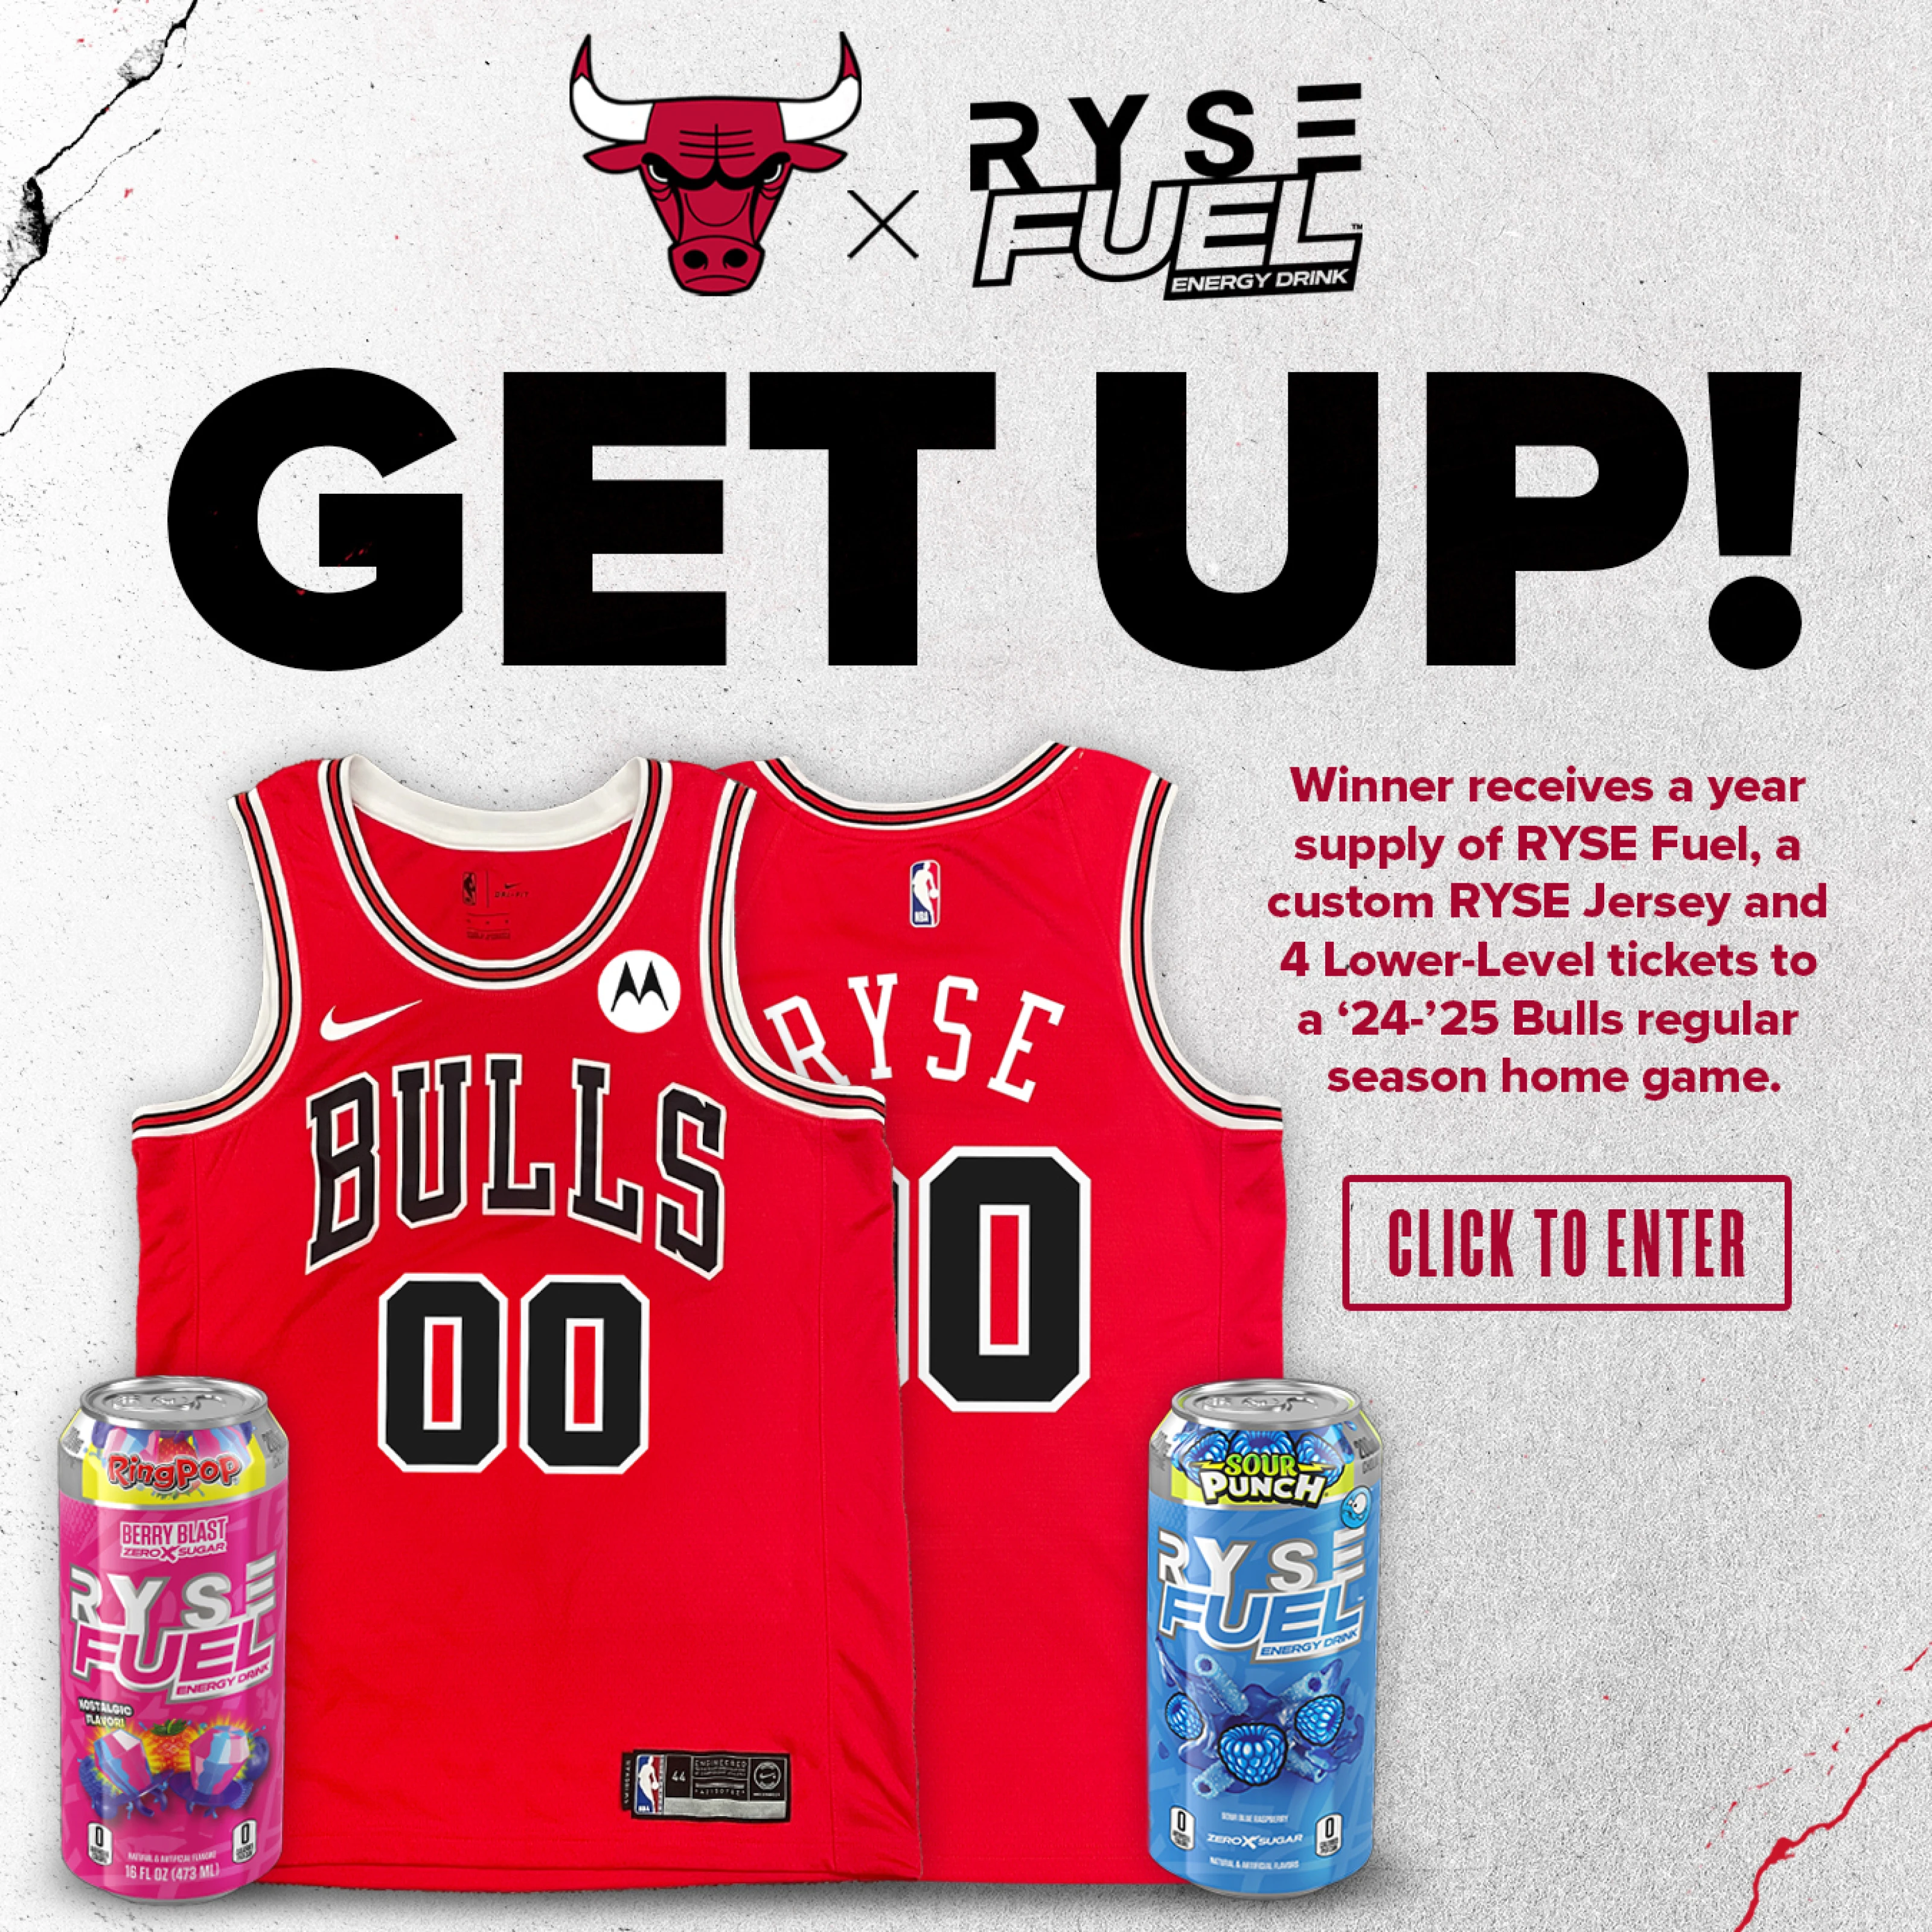 Chicago Bulls x Ryze Fuel Energy Drink, Get Up! Winner receives a year supply of RYSE Fuel, a custom RYSE Jersey and 4 Lower-Level tickets to a 24-25 Bulls regular season home game. Click to Enter